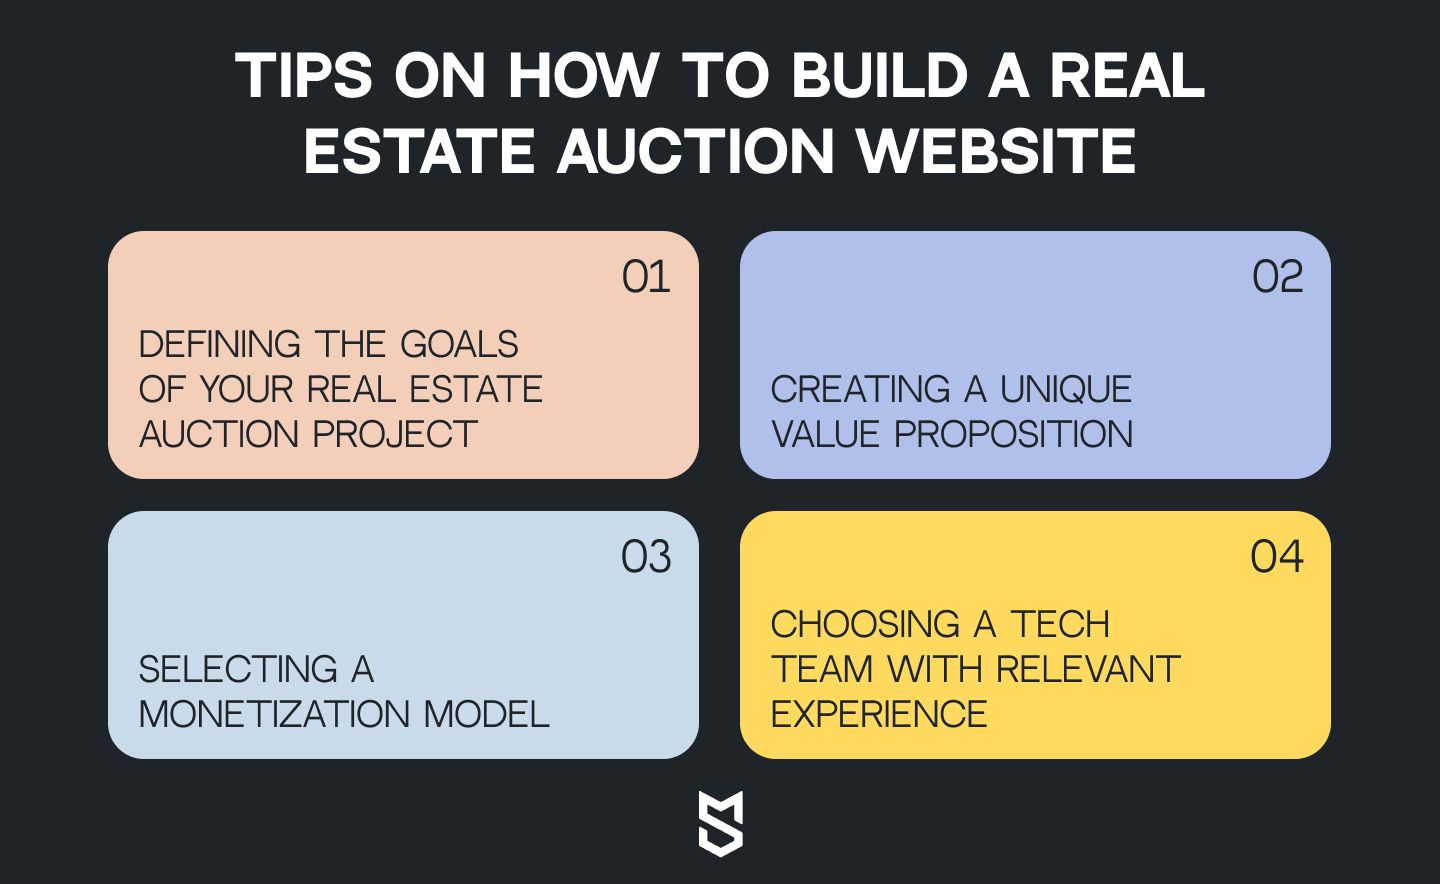 Tips on how to build a real estate auction website